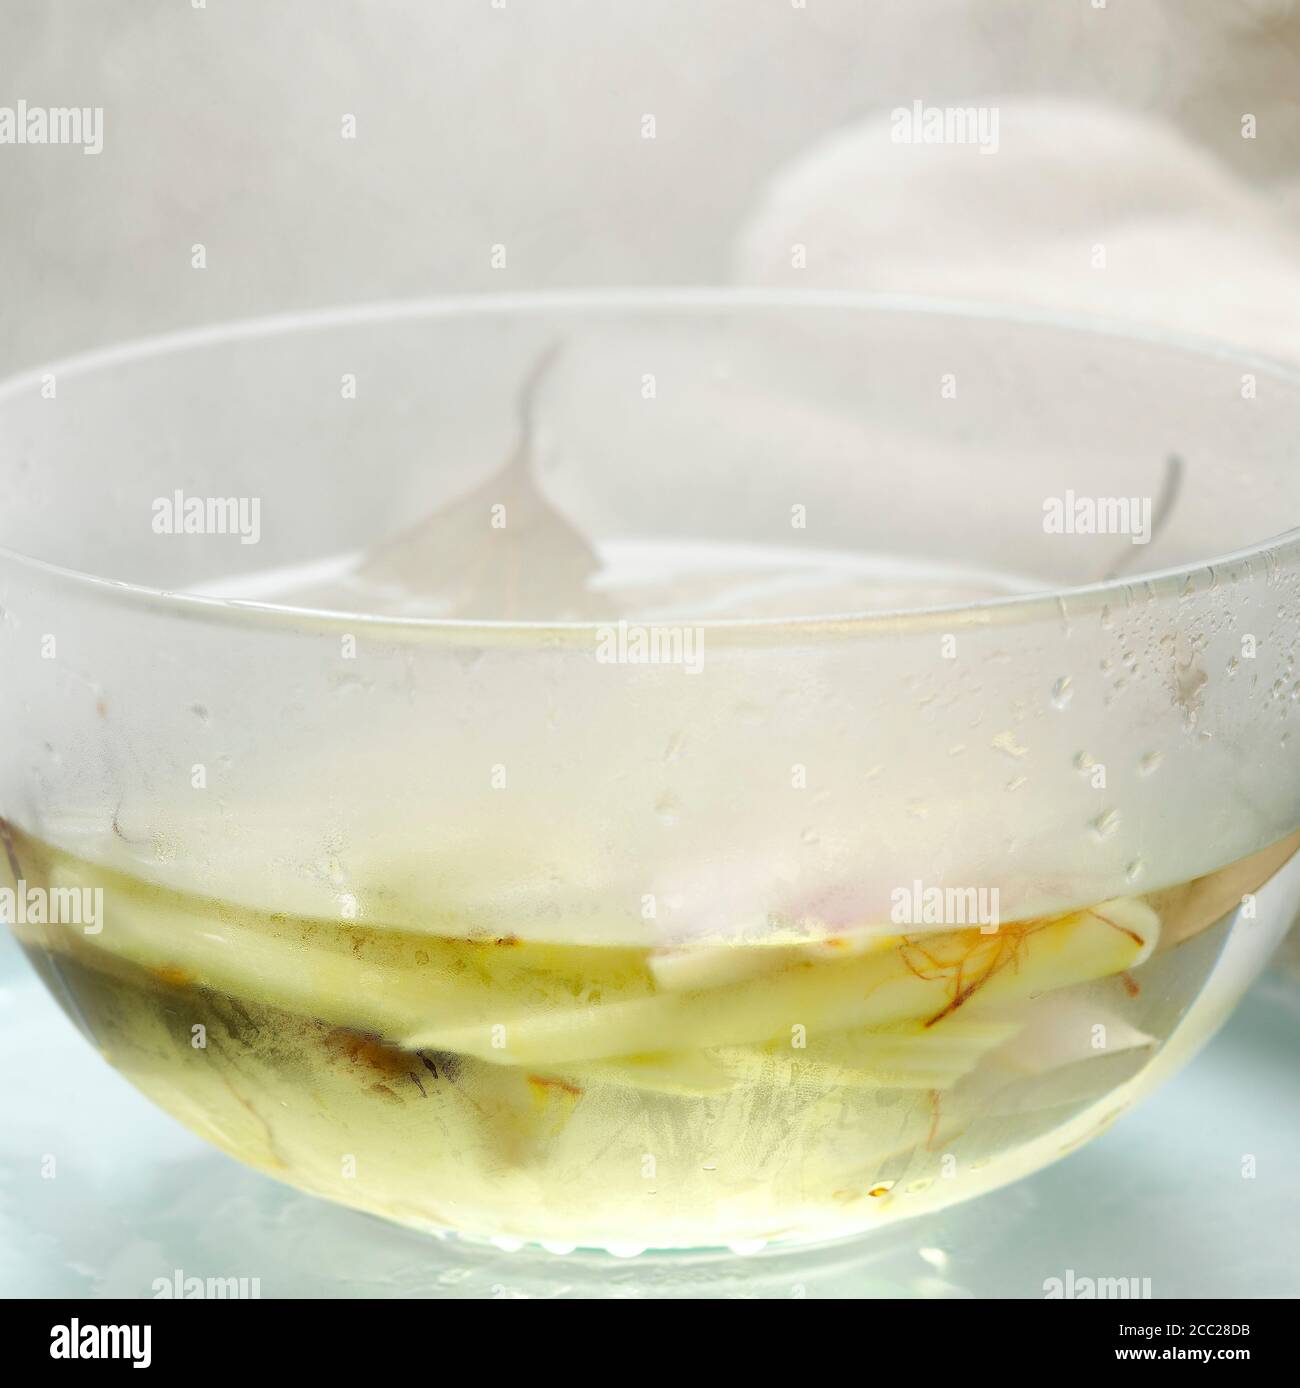 Lemongrass in bowl with hot water Stock Photo